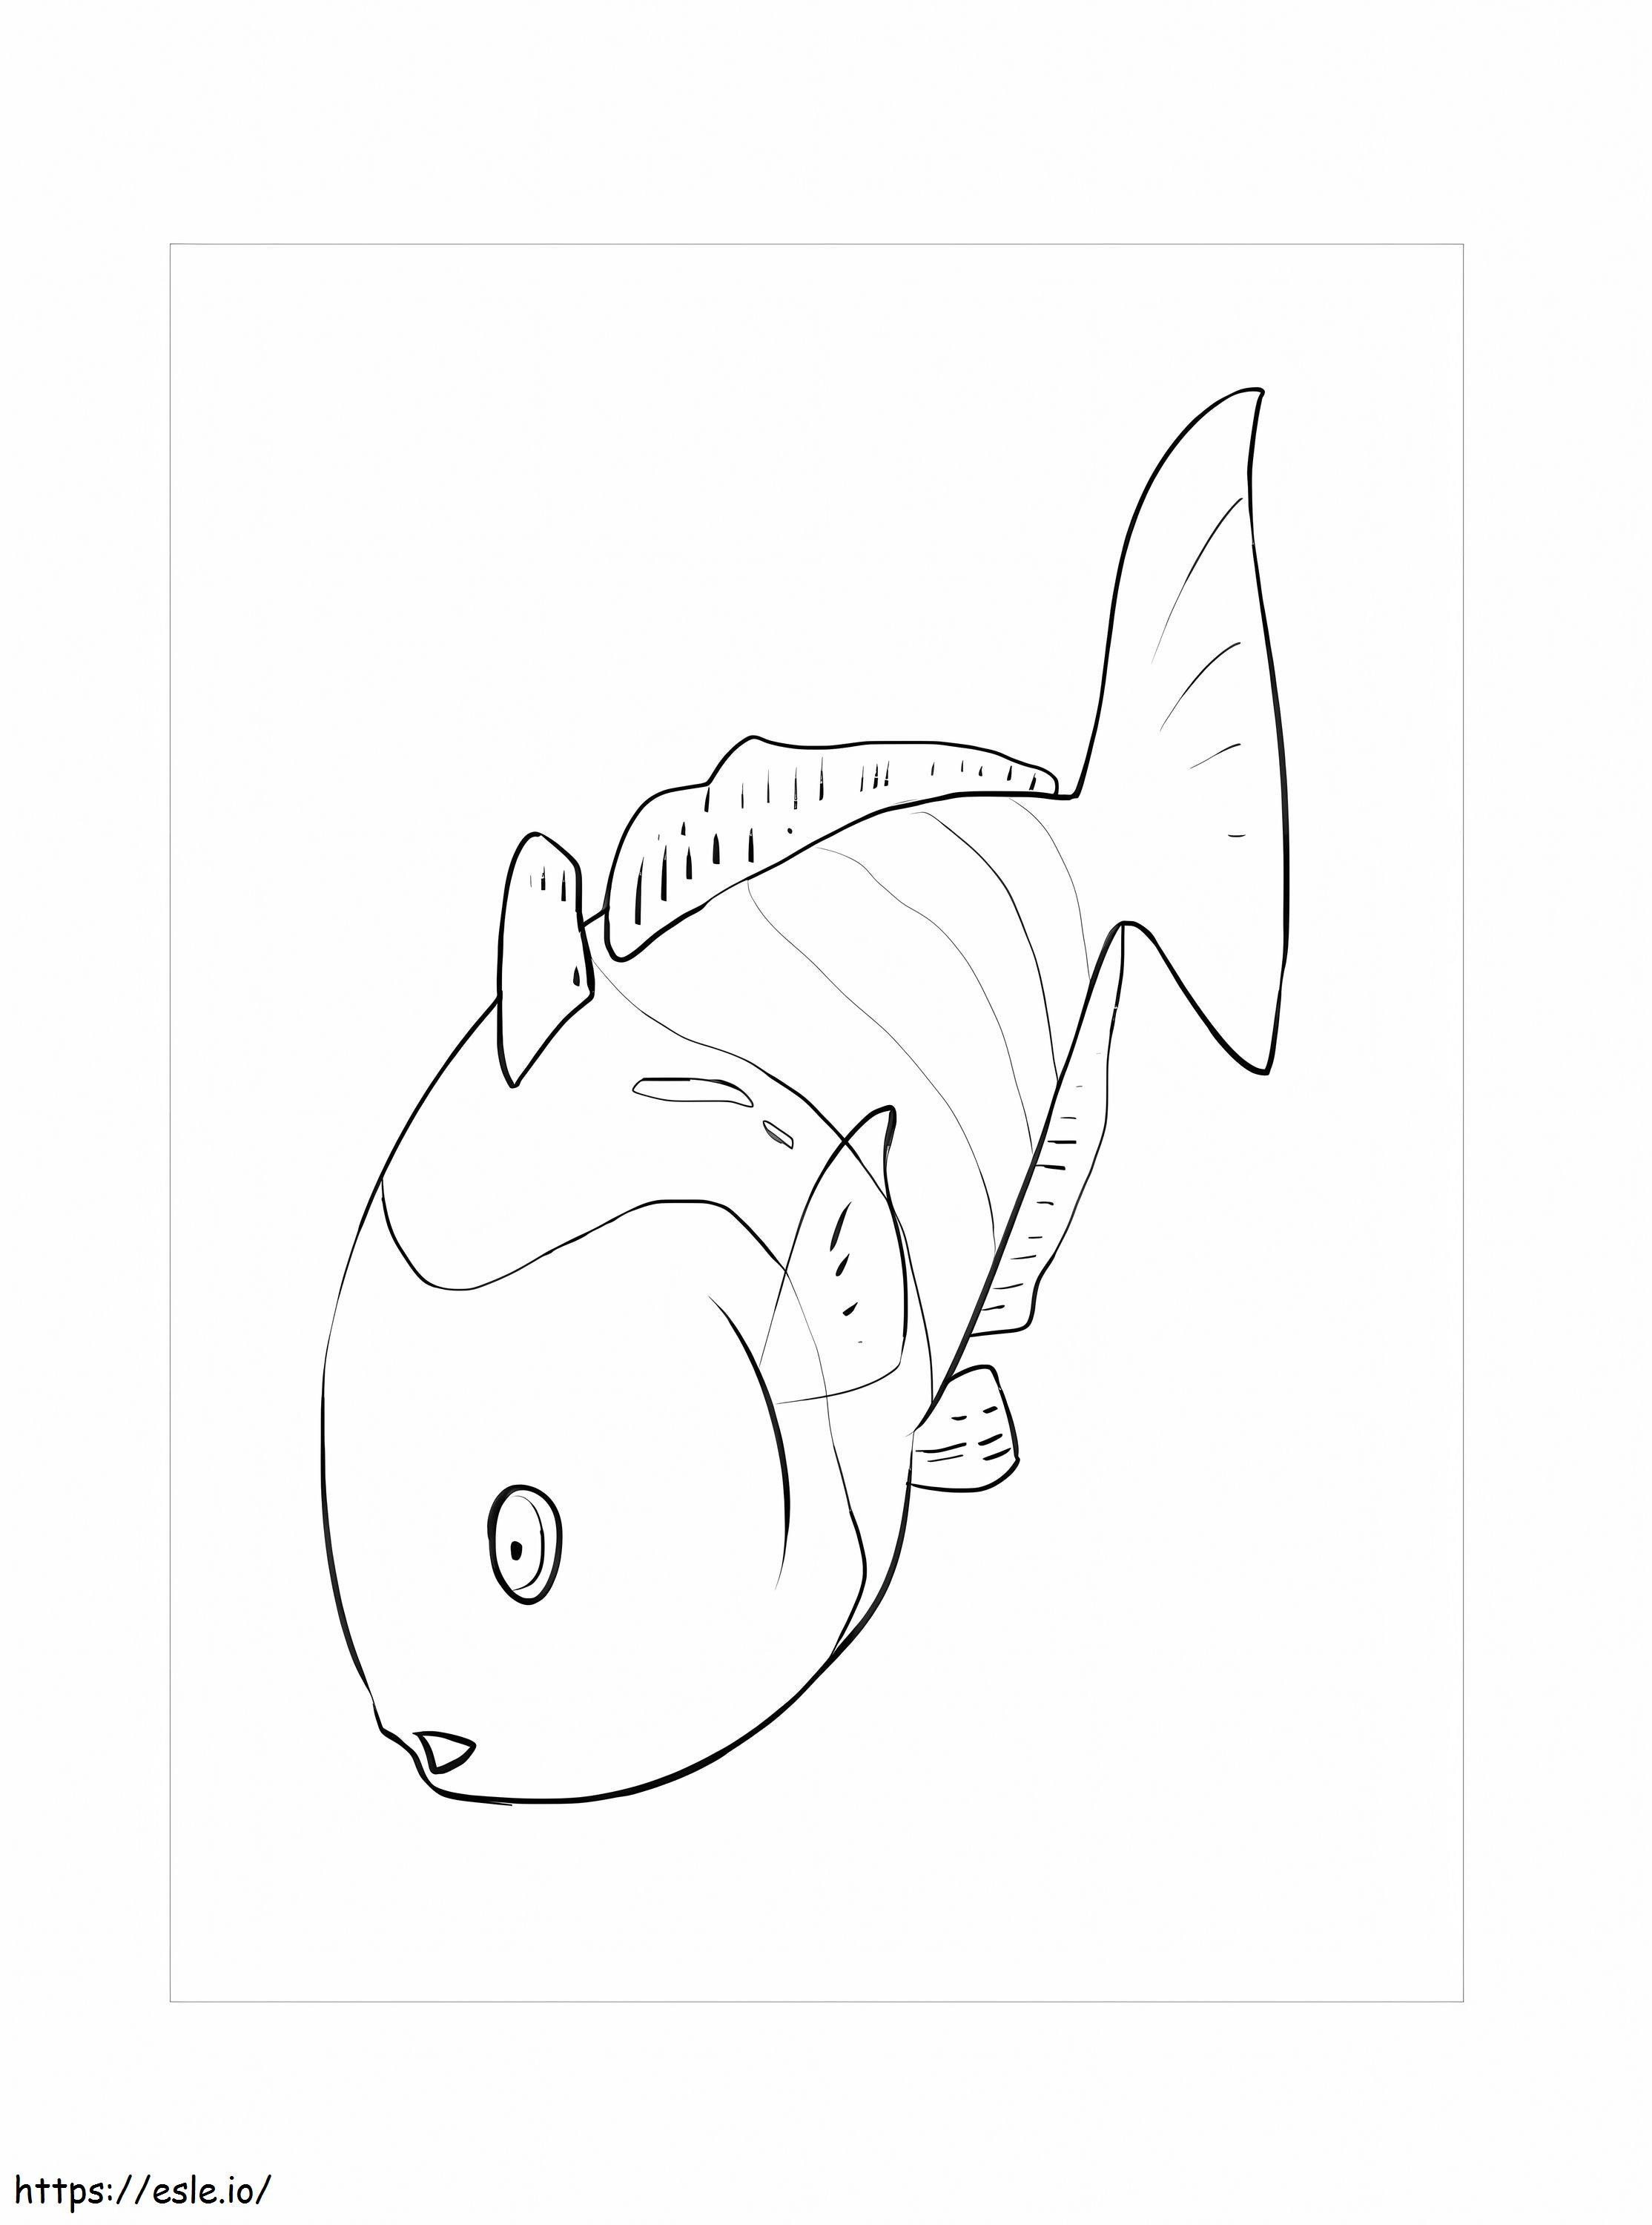 Awesome Rainbow Fish coloring page